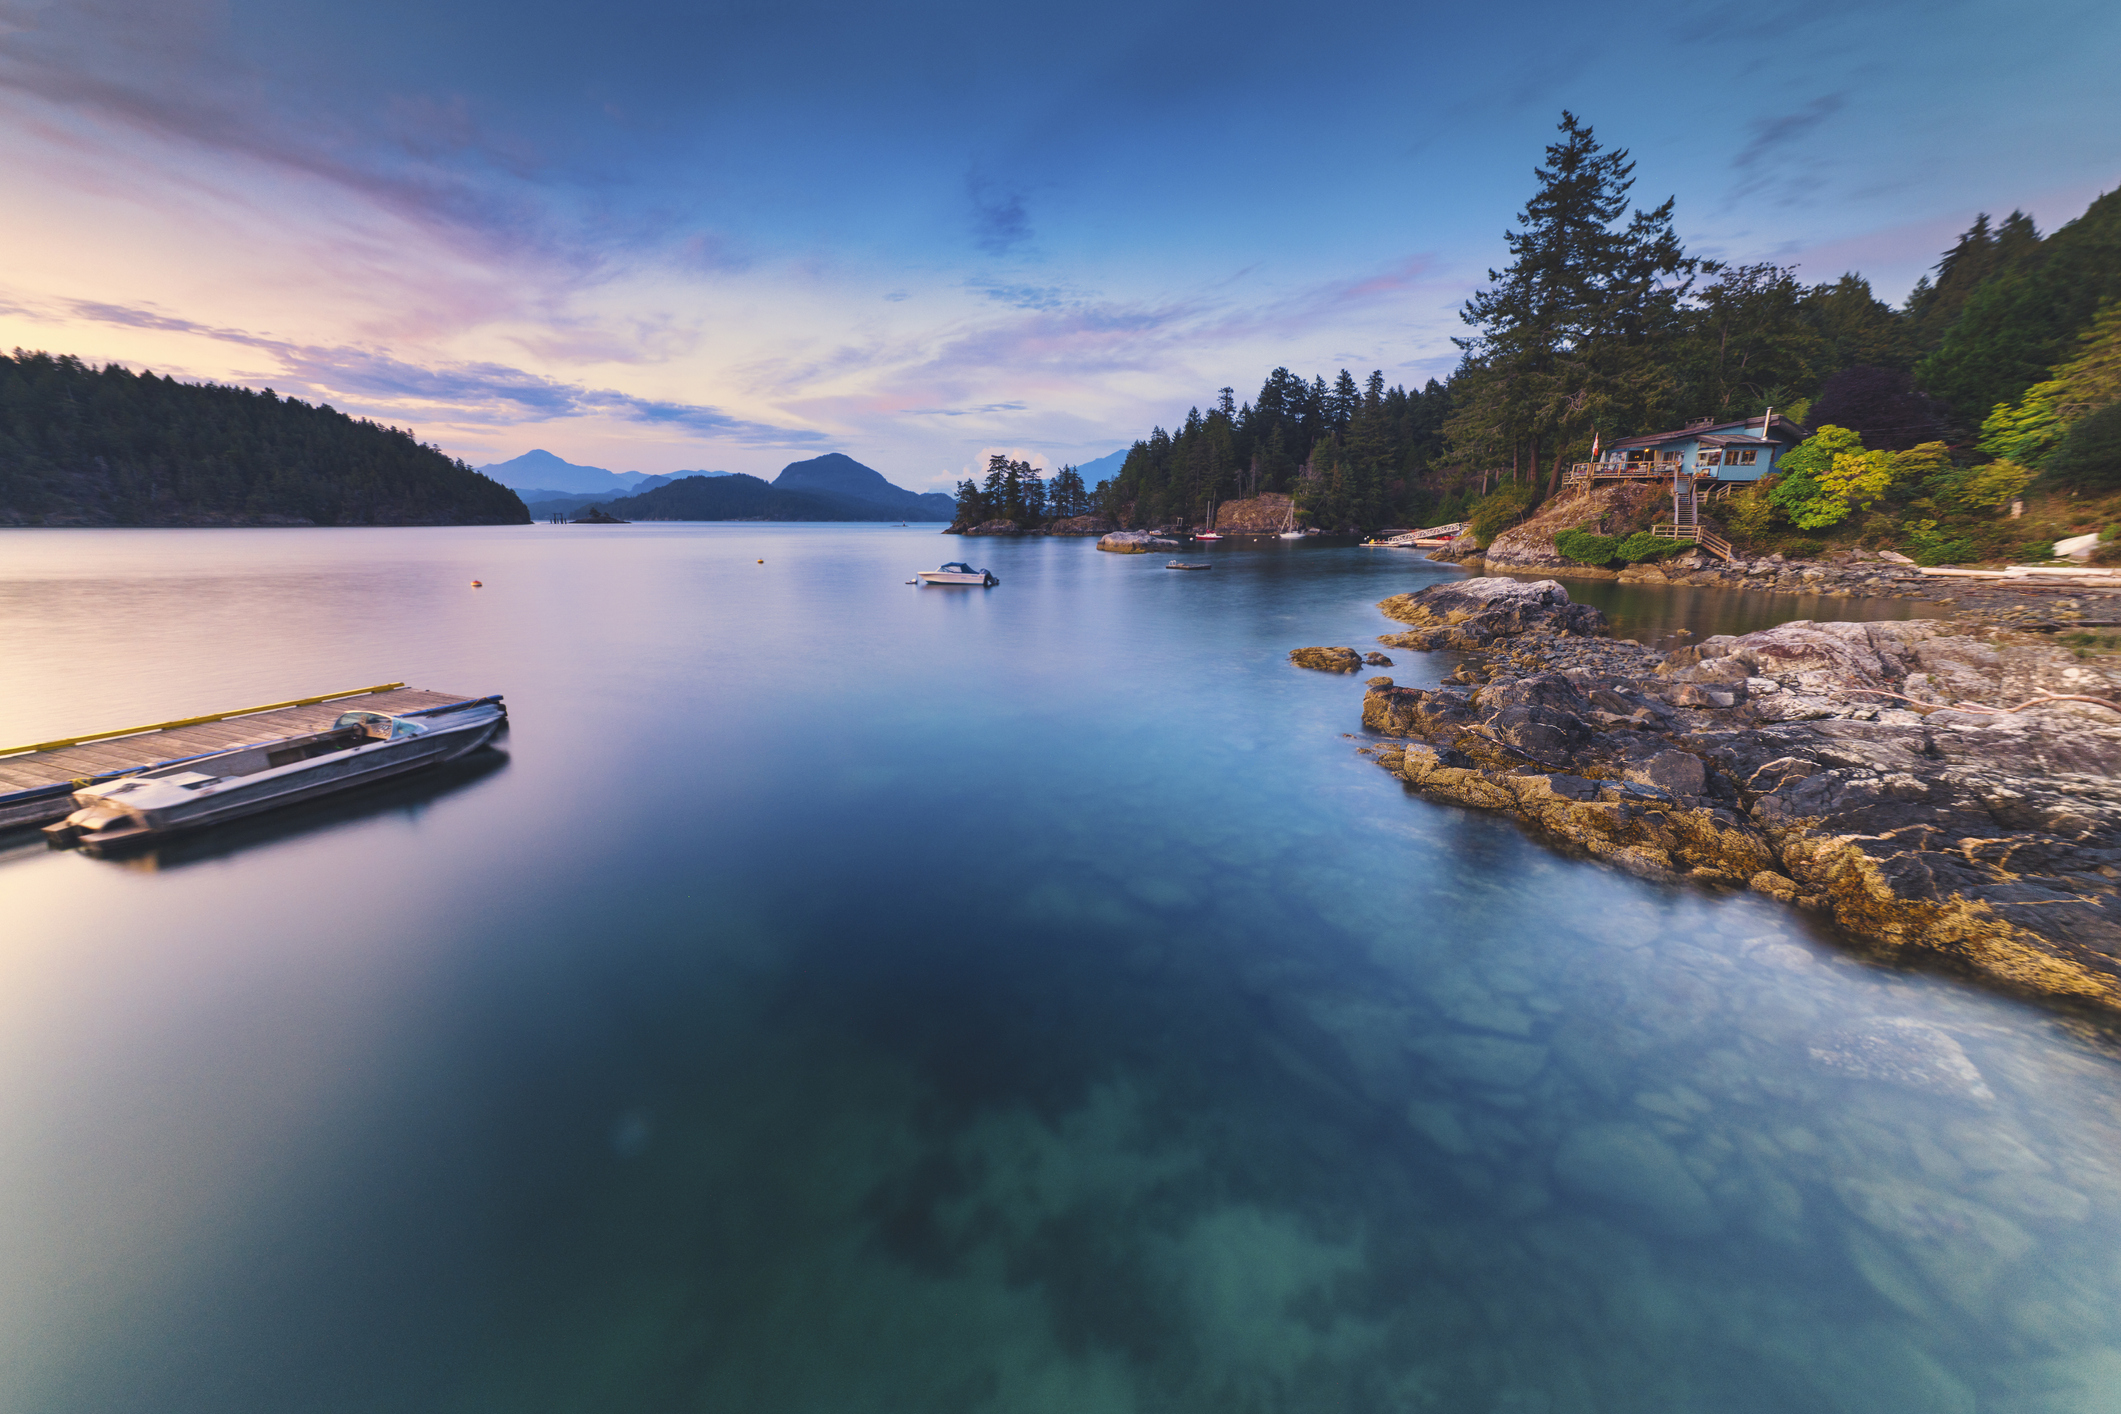 https://www.vmcdn.ca/f/files/via/images/sponsored-content-images/bc-is-awesome-bowen-island-gettyimages-1200425733.jpg